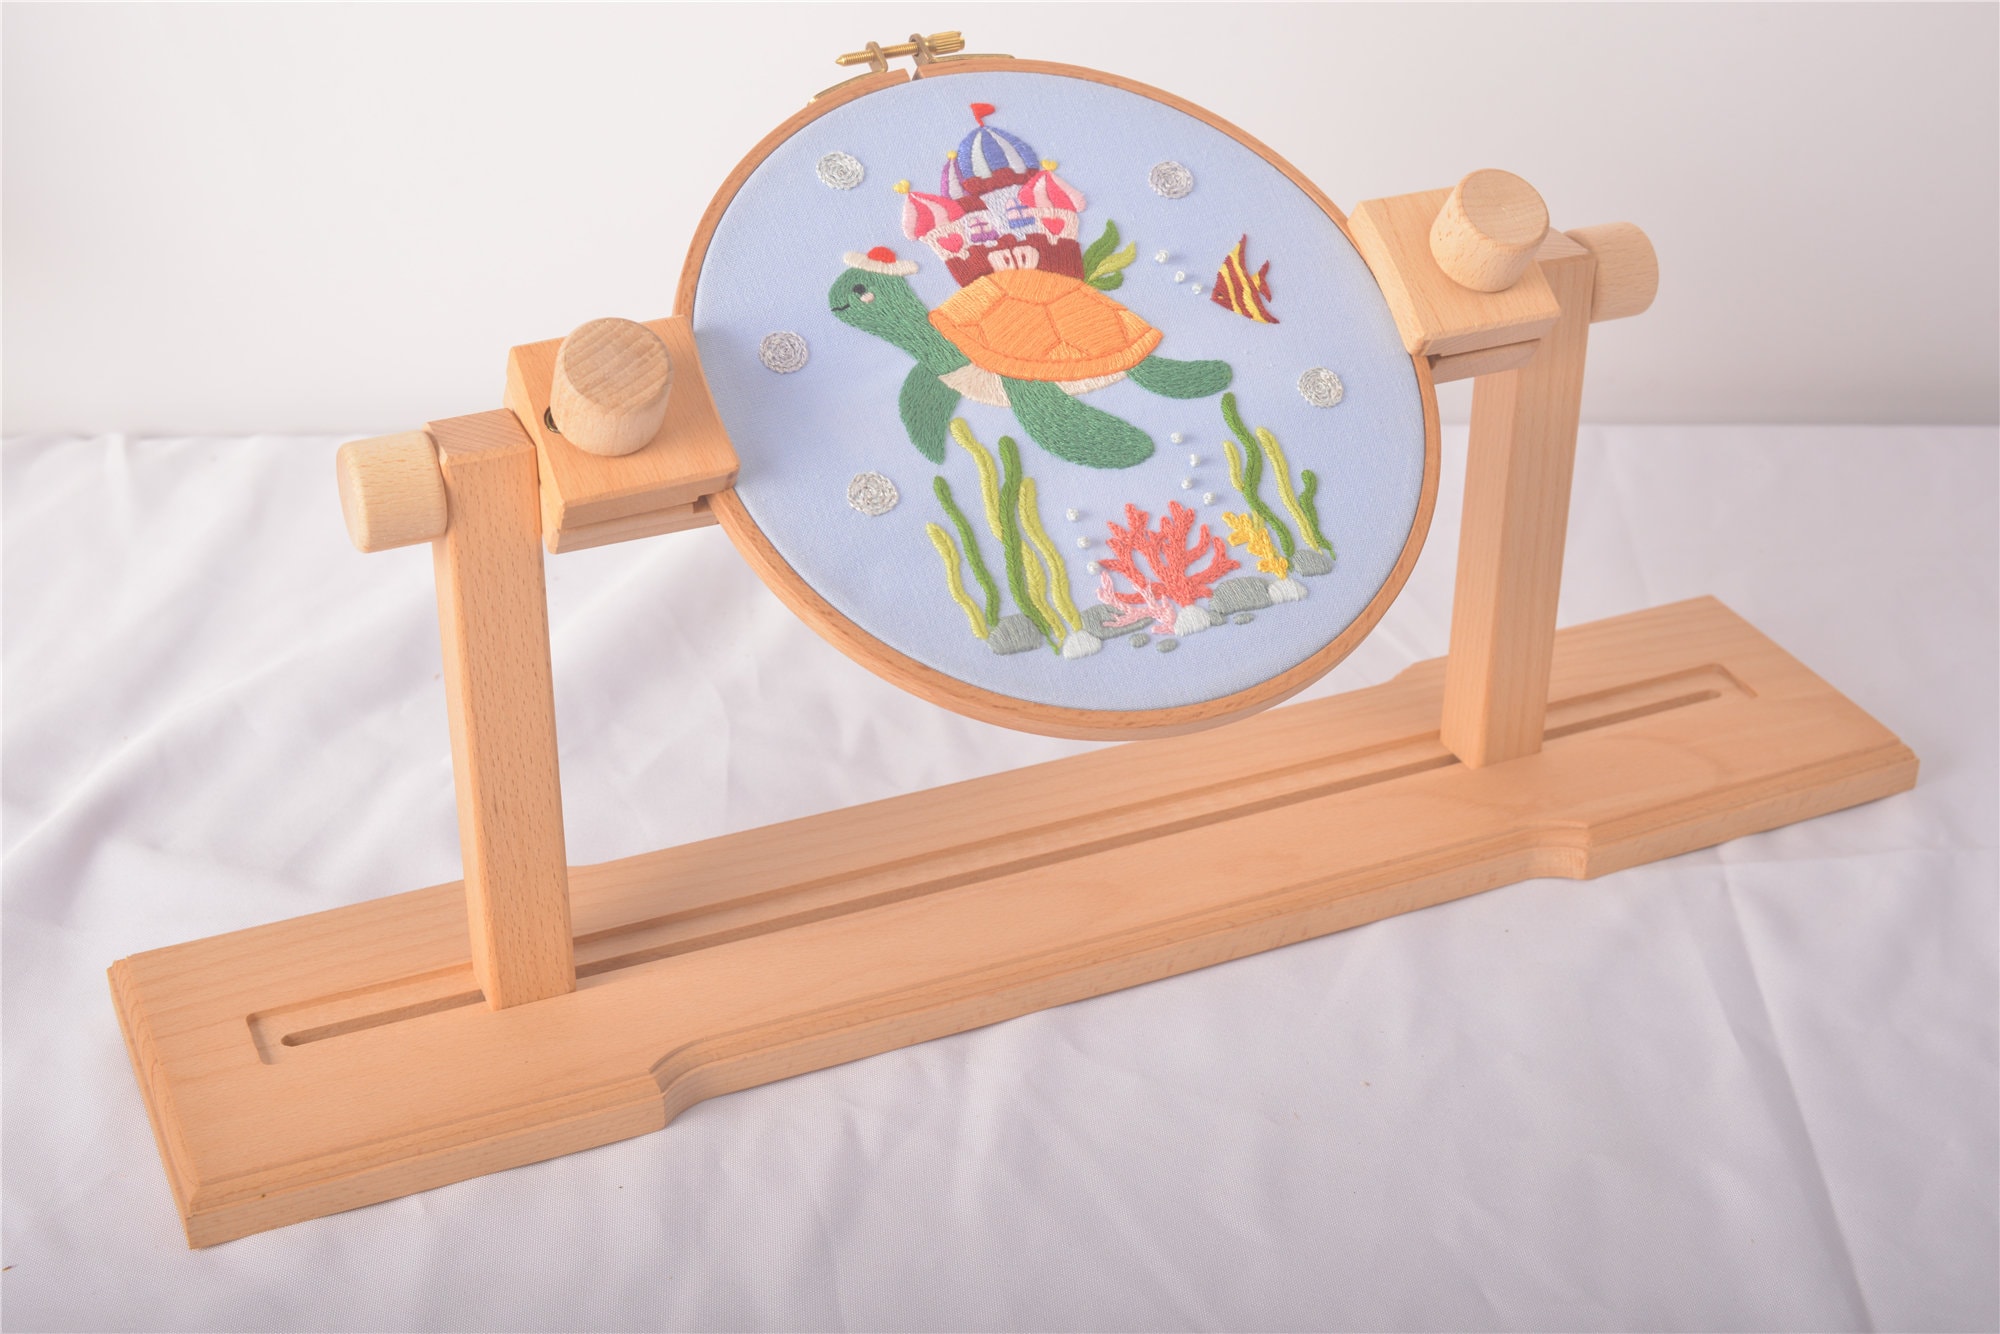 Adjustable Rotated Embroidery Hoop Stand, Cross Stitch Stand Lap, Natural  Beech Wood Embroidery Hoop Holder, Vertical Table Stand Hands Free  Embroider